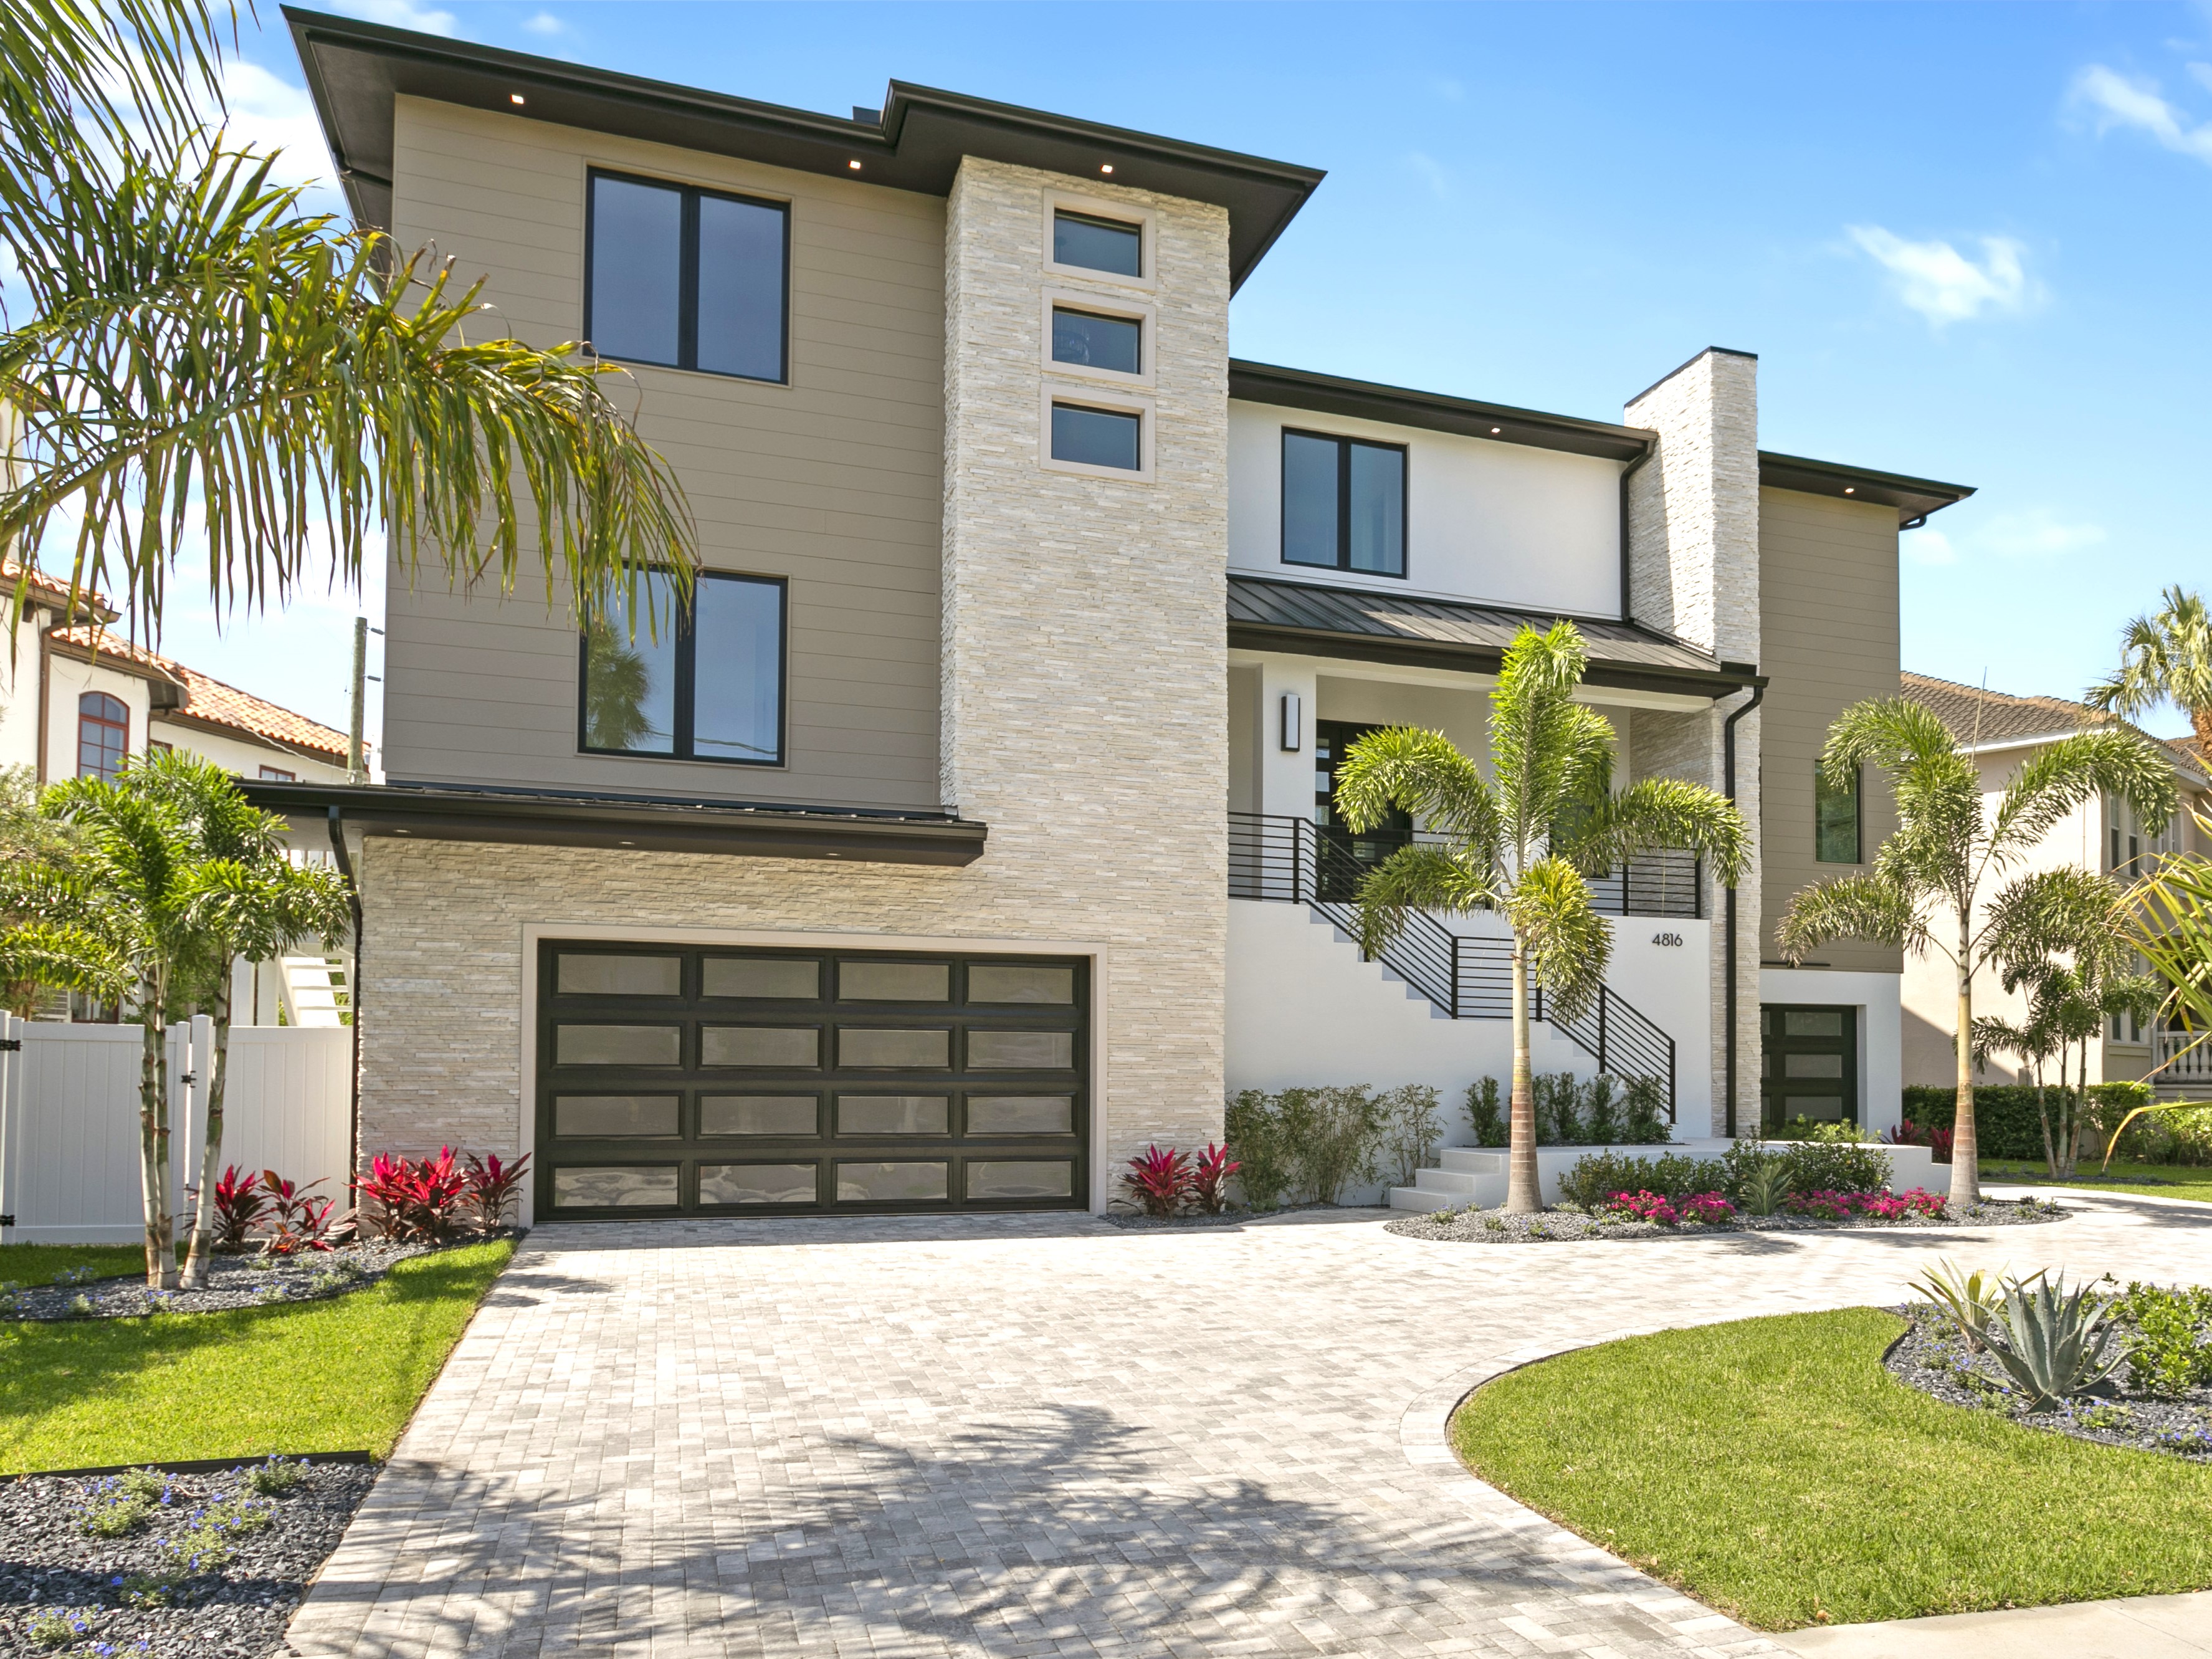 Steven Anthony is the best home builder in South Tampa